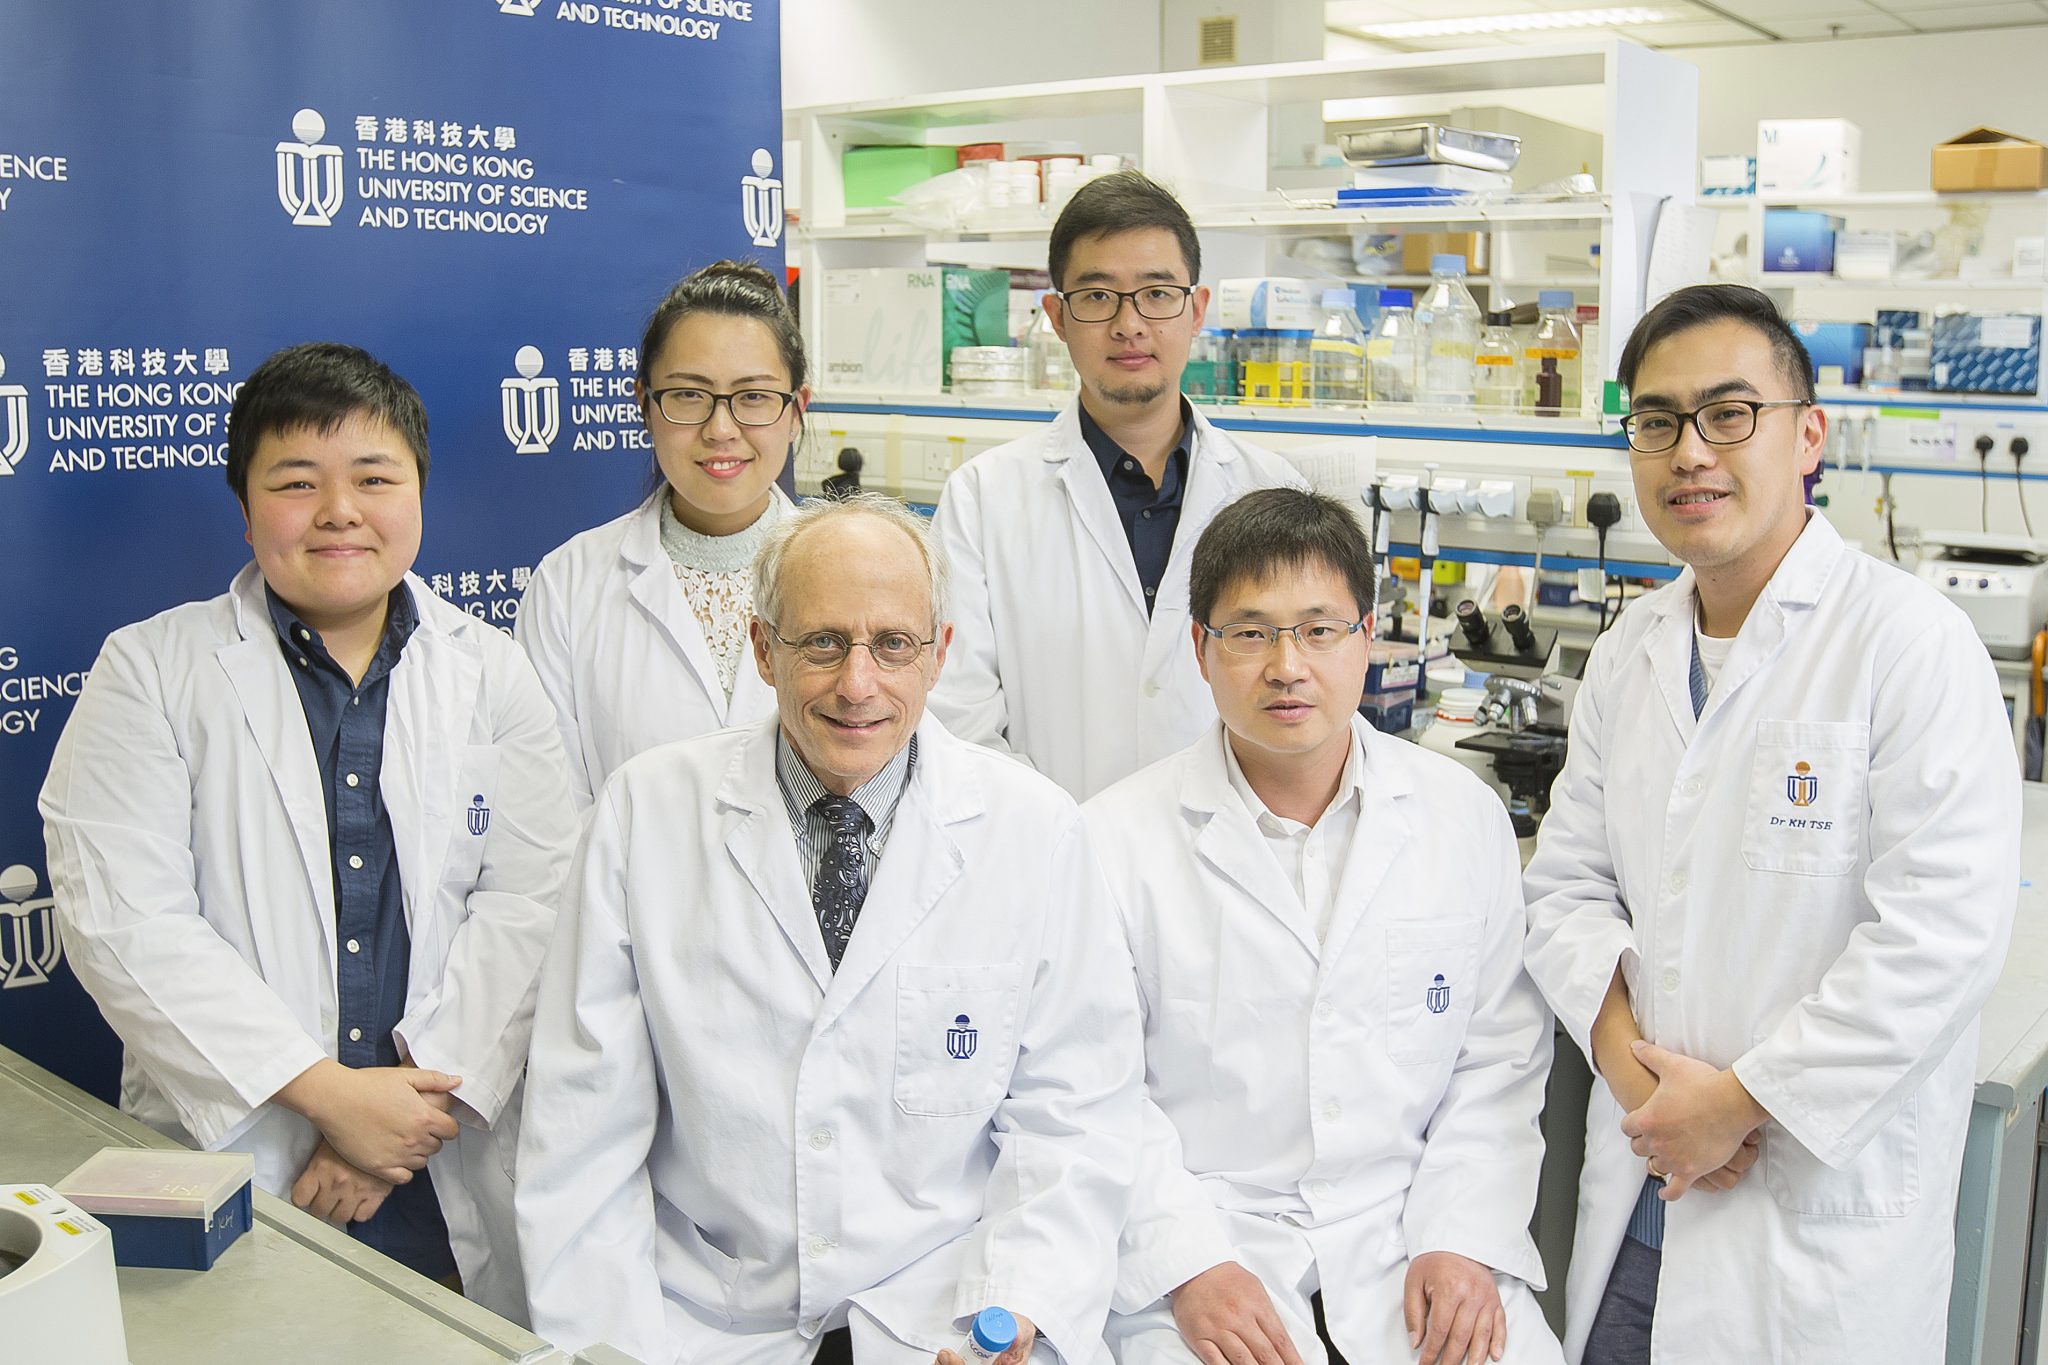 Prof Karl Herrup (second left, front row), Prof Du Shengwang (second right, front row), Cheng Aifeng (left, back row) and their research team members.